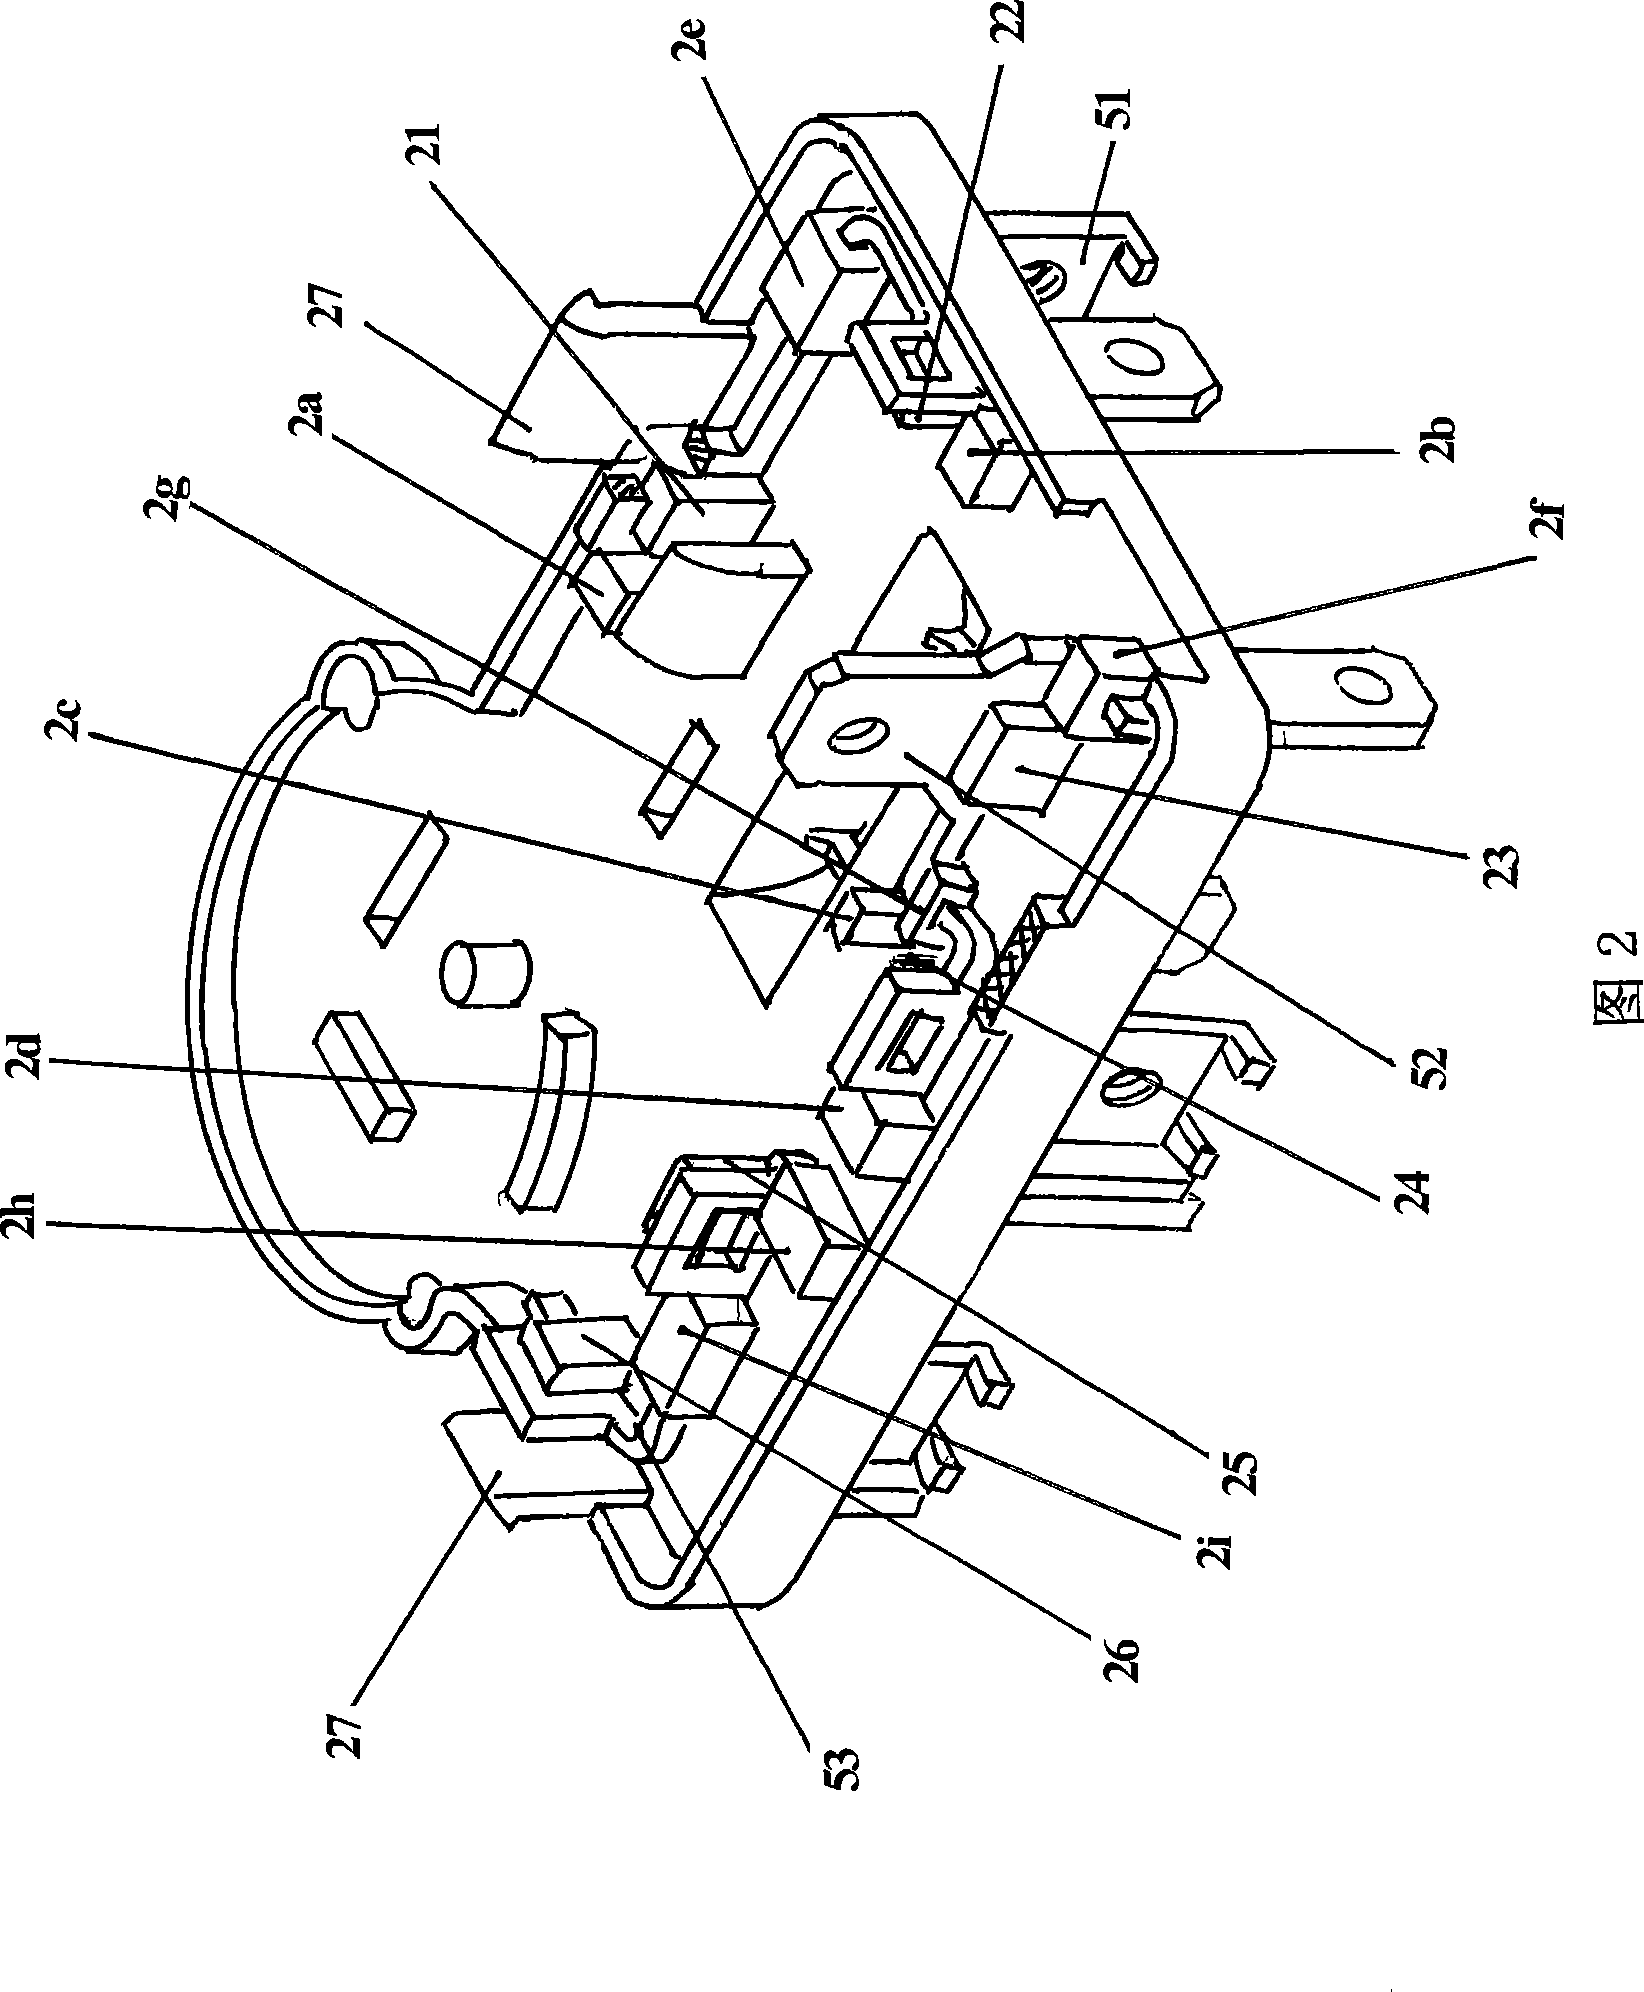 Energy-saving type integral single phase AC electric motor starting and protection device